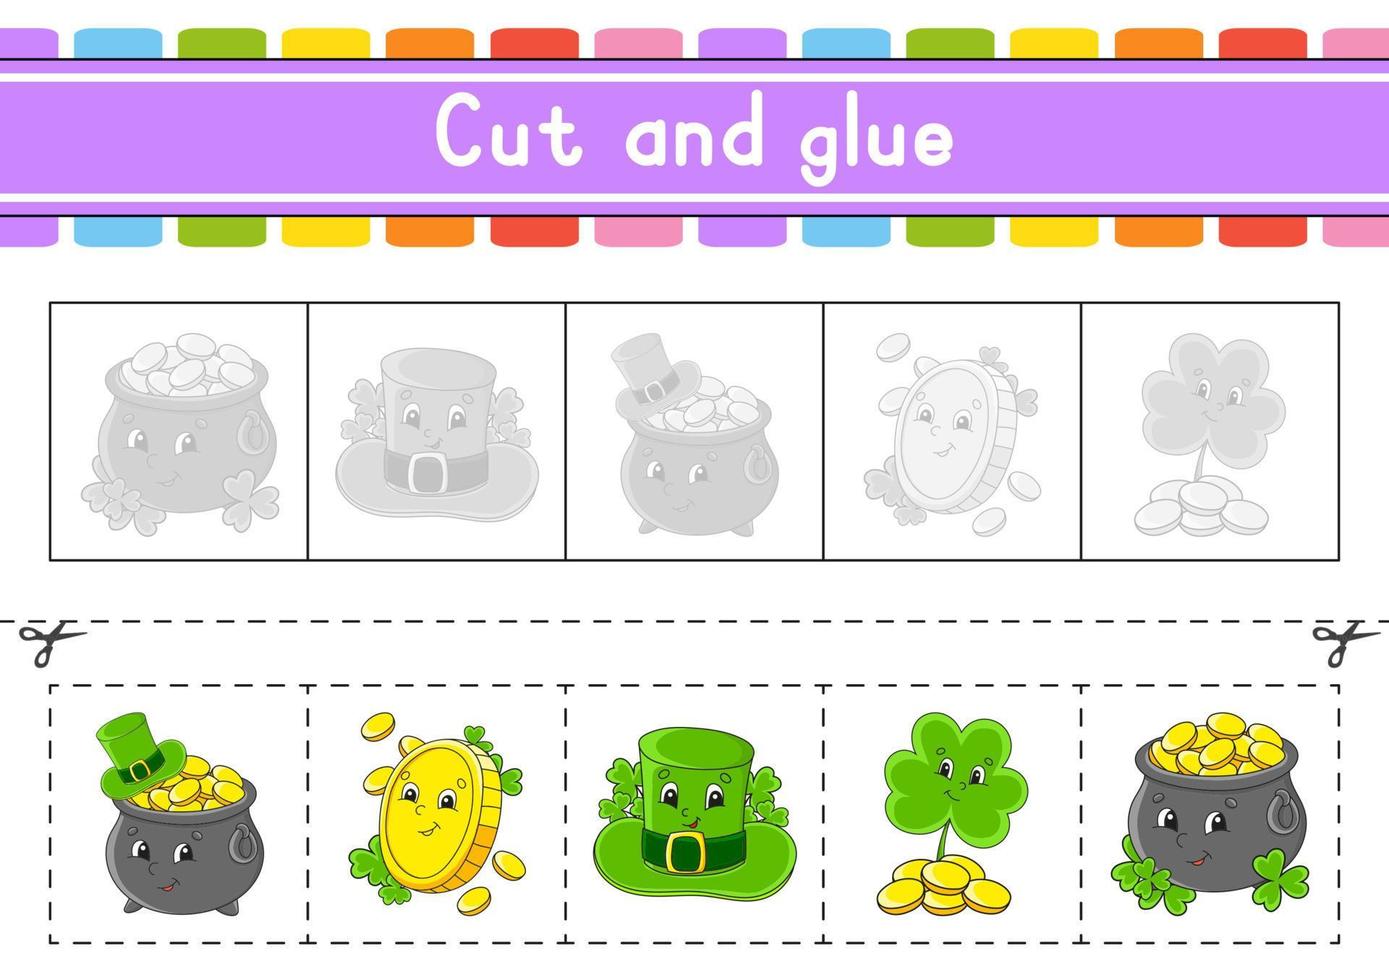 Cut and play. Paper game with glue. Flash cards. Education worksheet. Activity page. Scissors practice. Isolated vector illustration. cartoon style. St. Patrick's day.